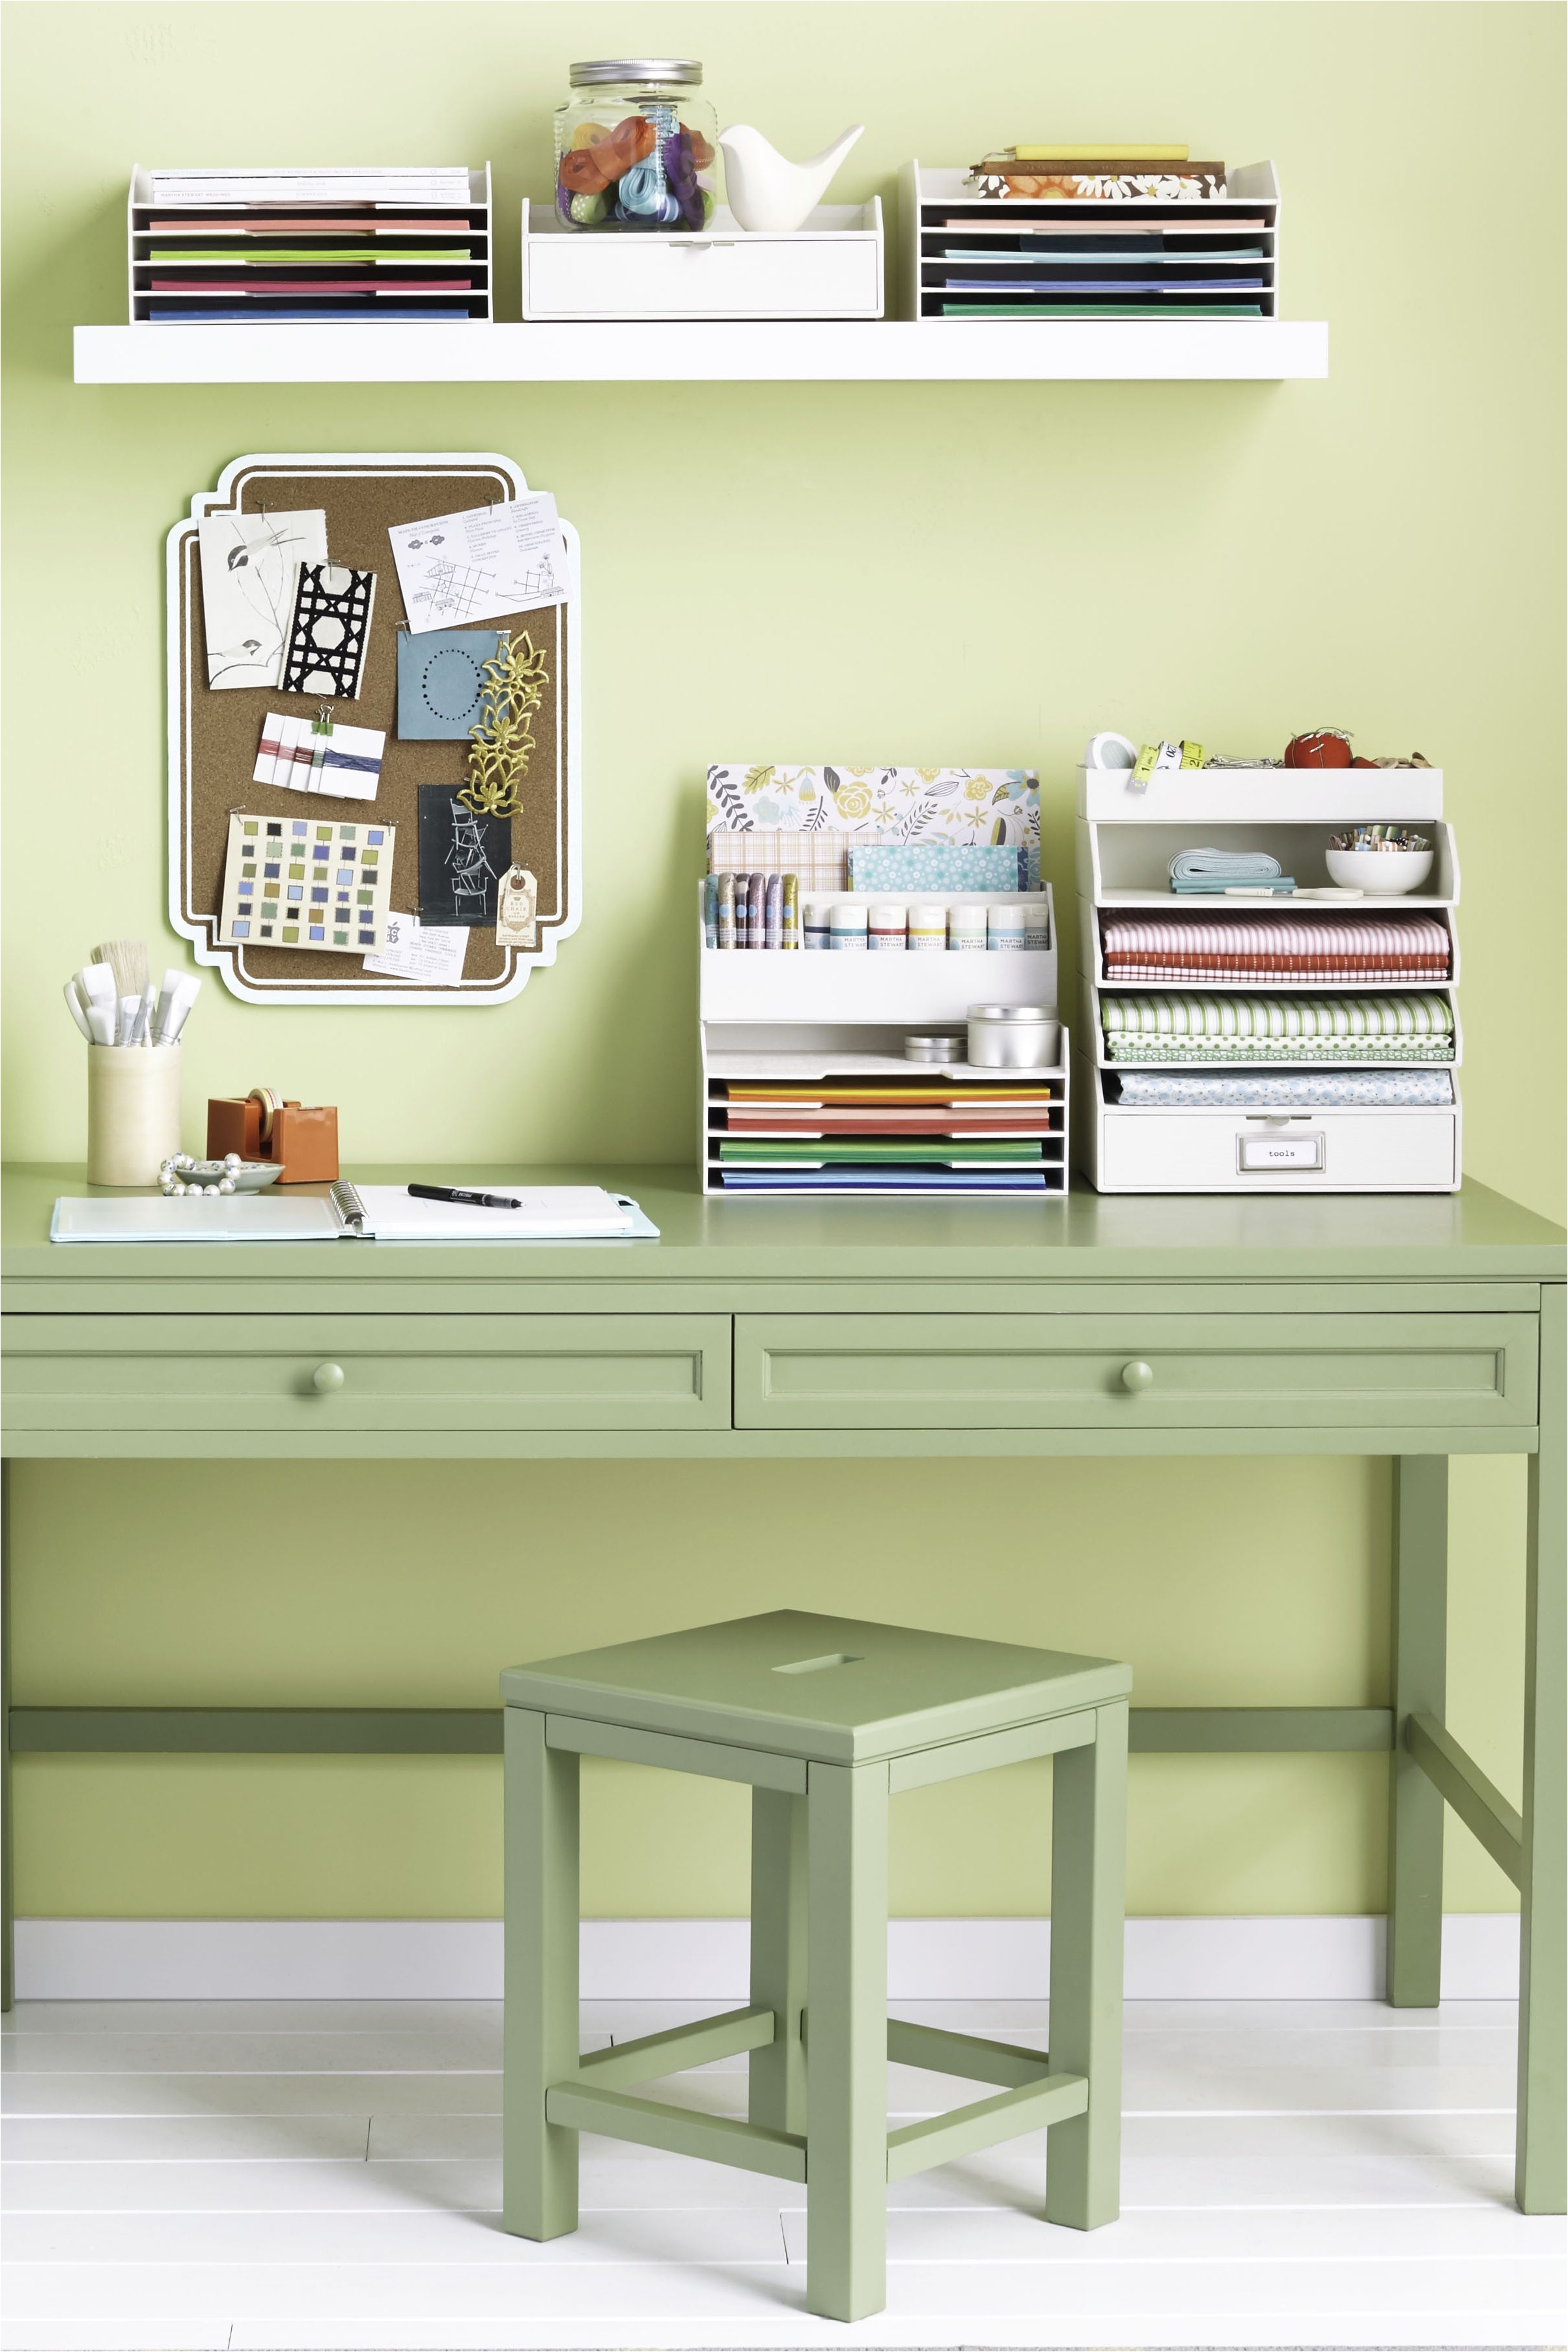 Staples Decorative Computer Paper Bring order to Your Craft Room with the Martha Stewart Stack Fit